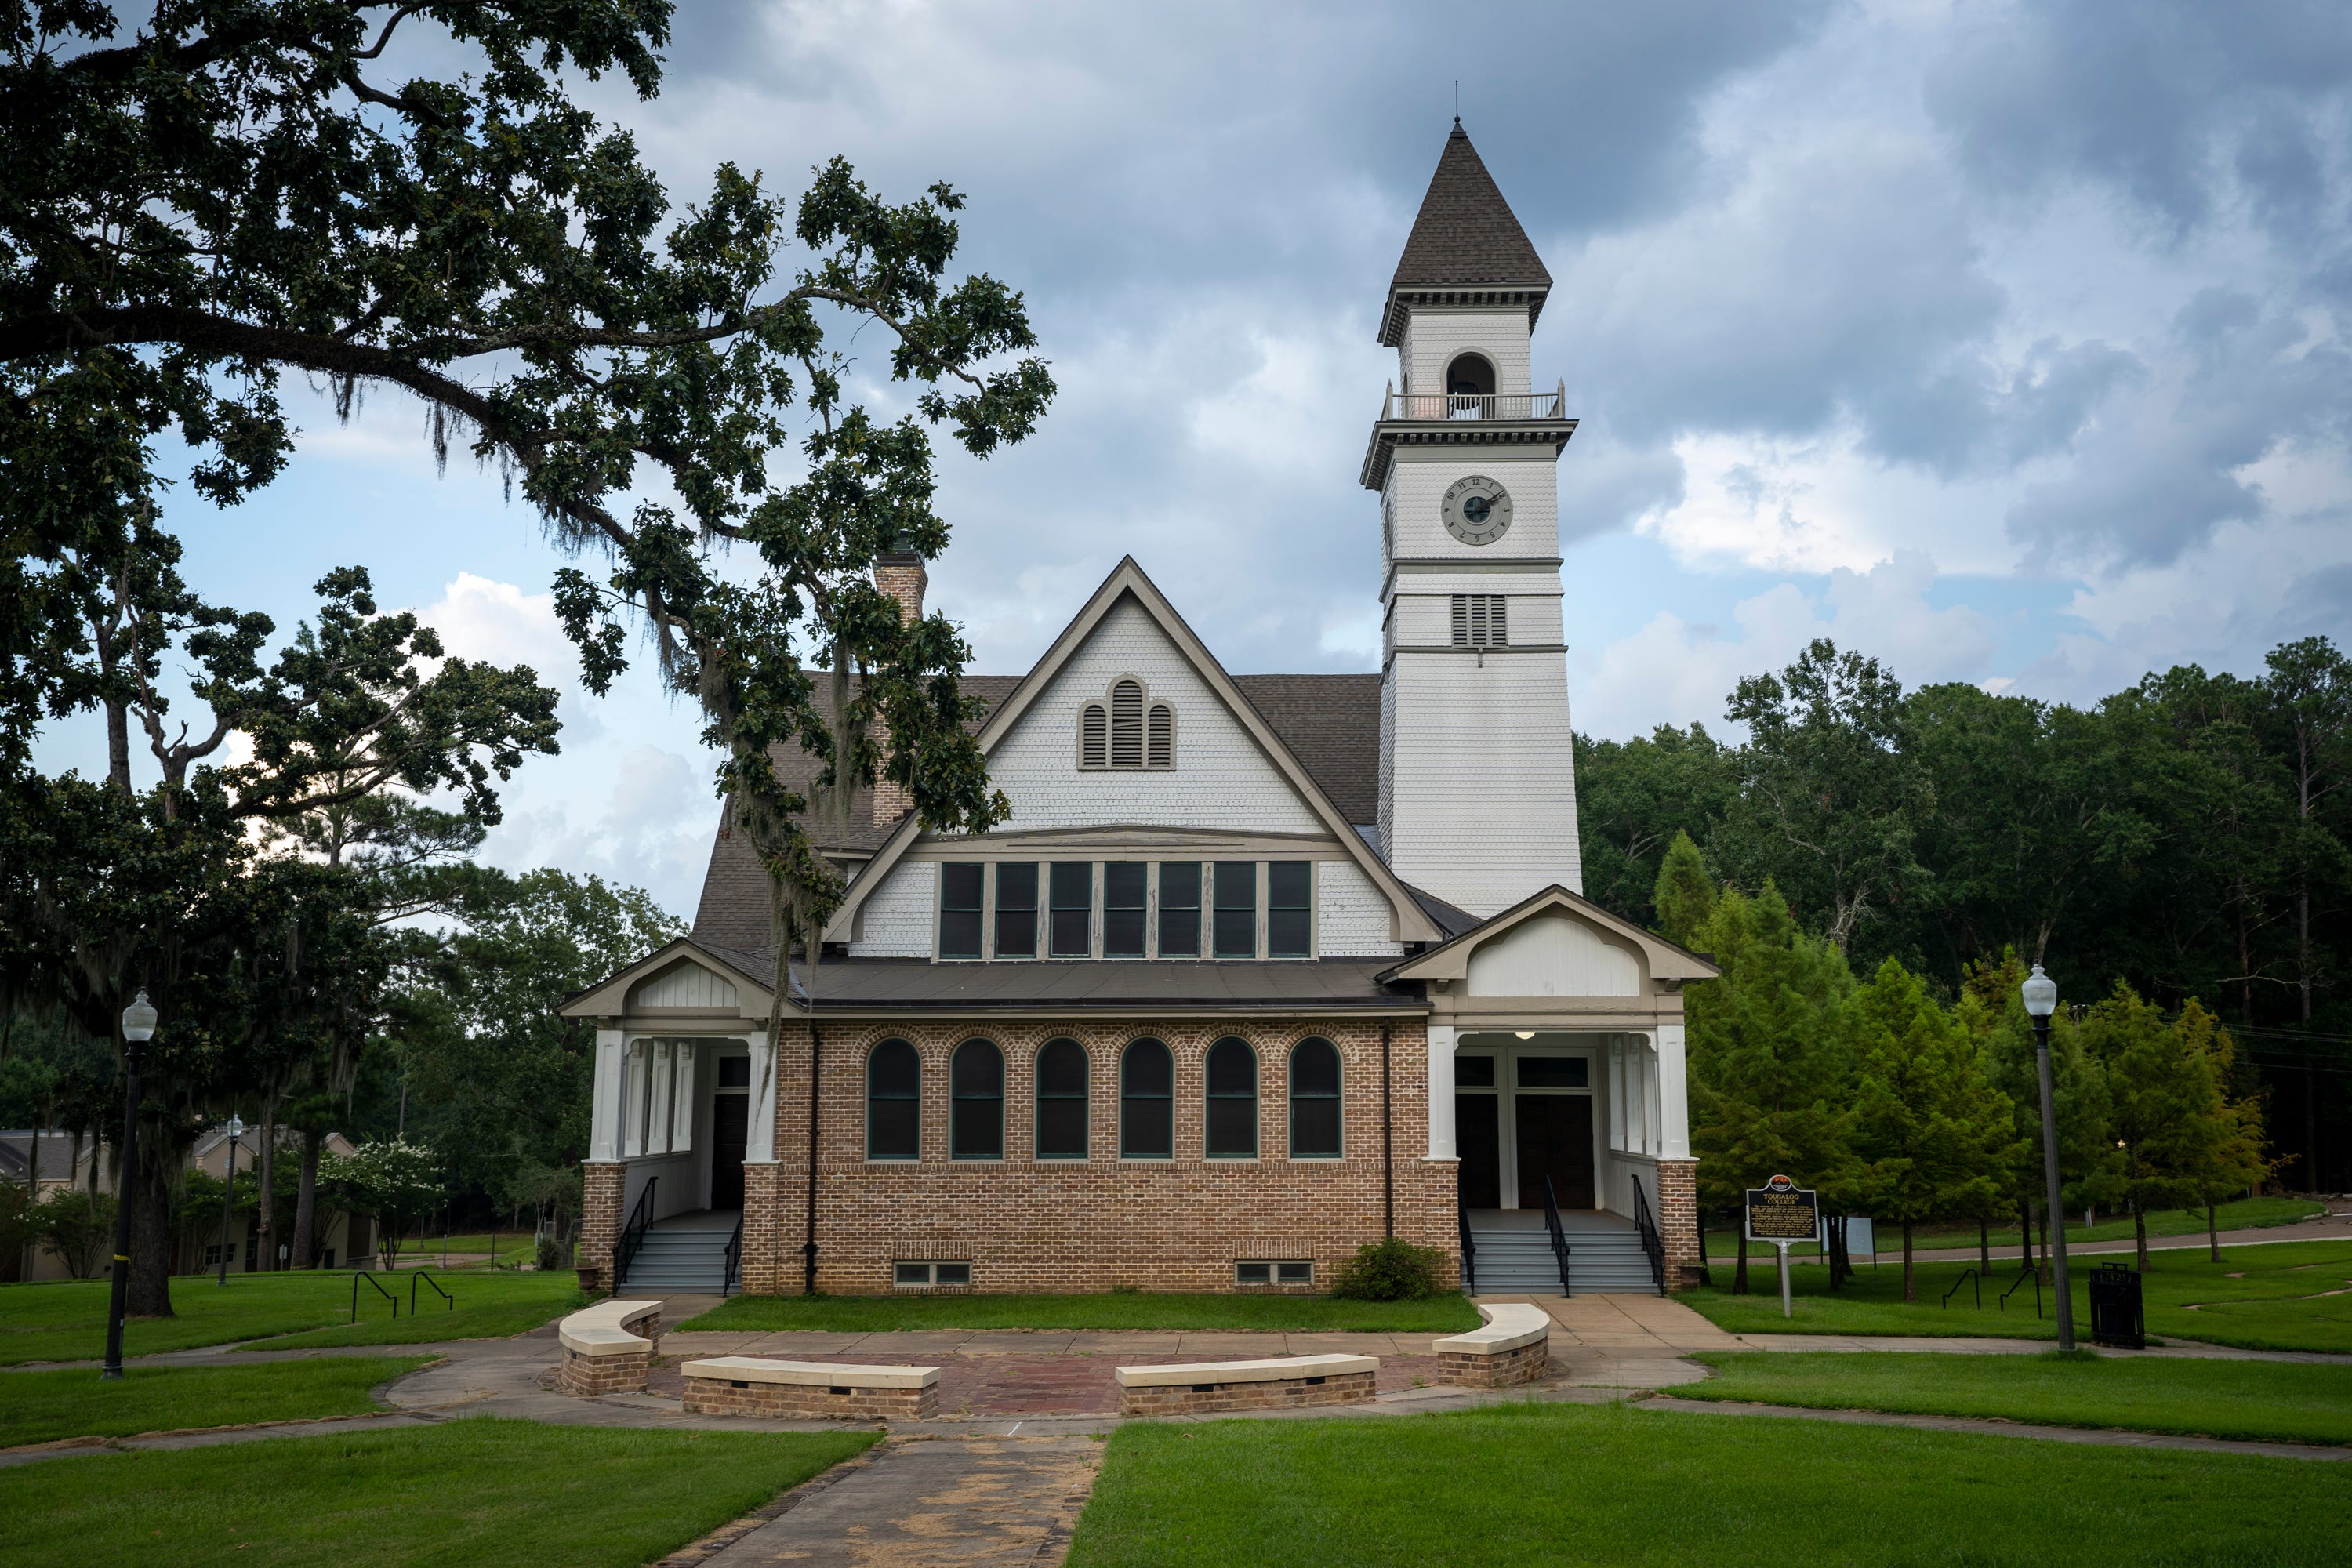 Woodworth Chapel, on the campus of Tougaloo College, played host to student meetings about desegregation efforts in the area, including the sit-in at the Jackson Municipal Library.